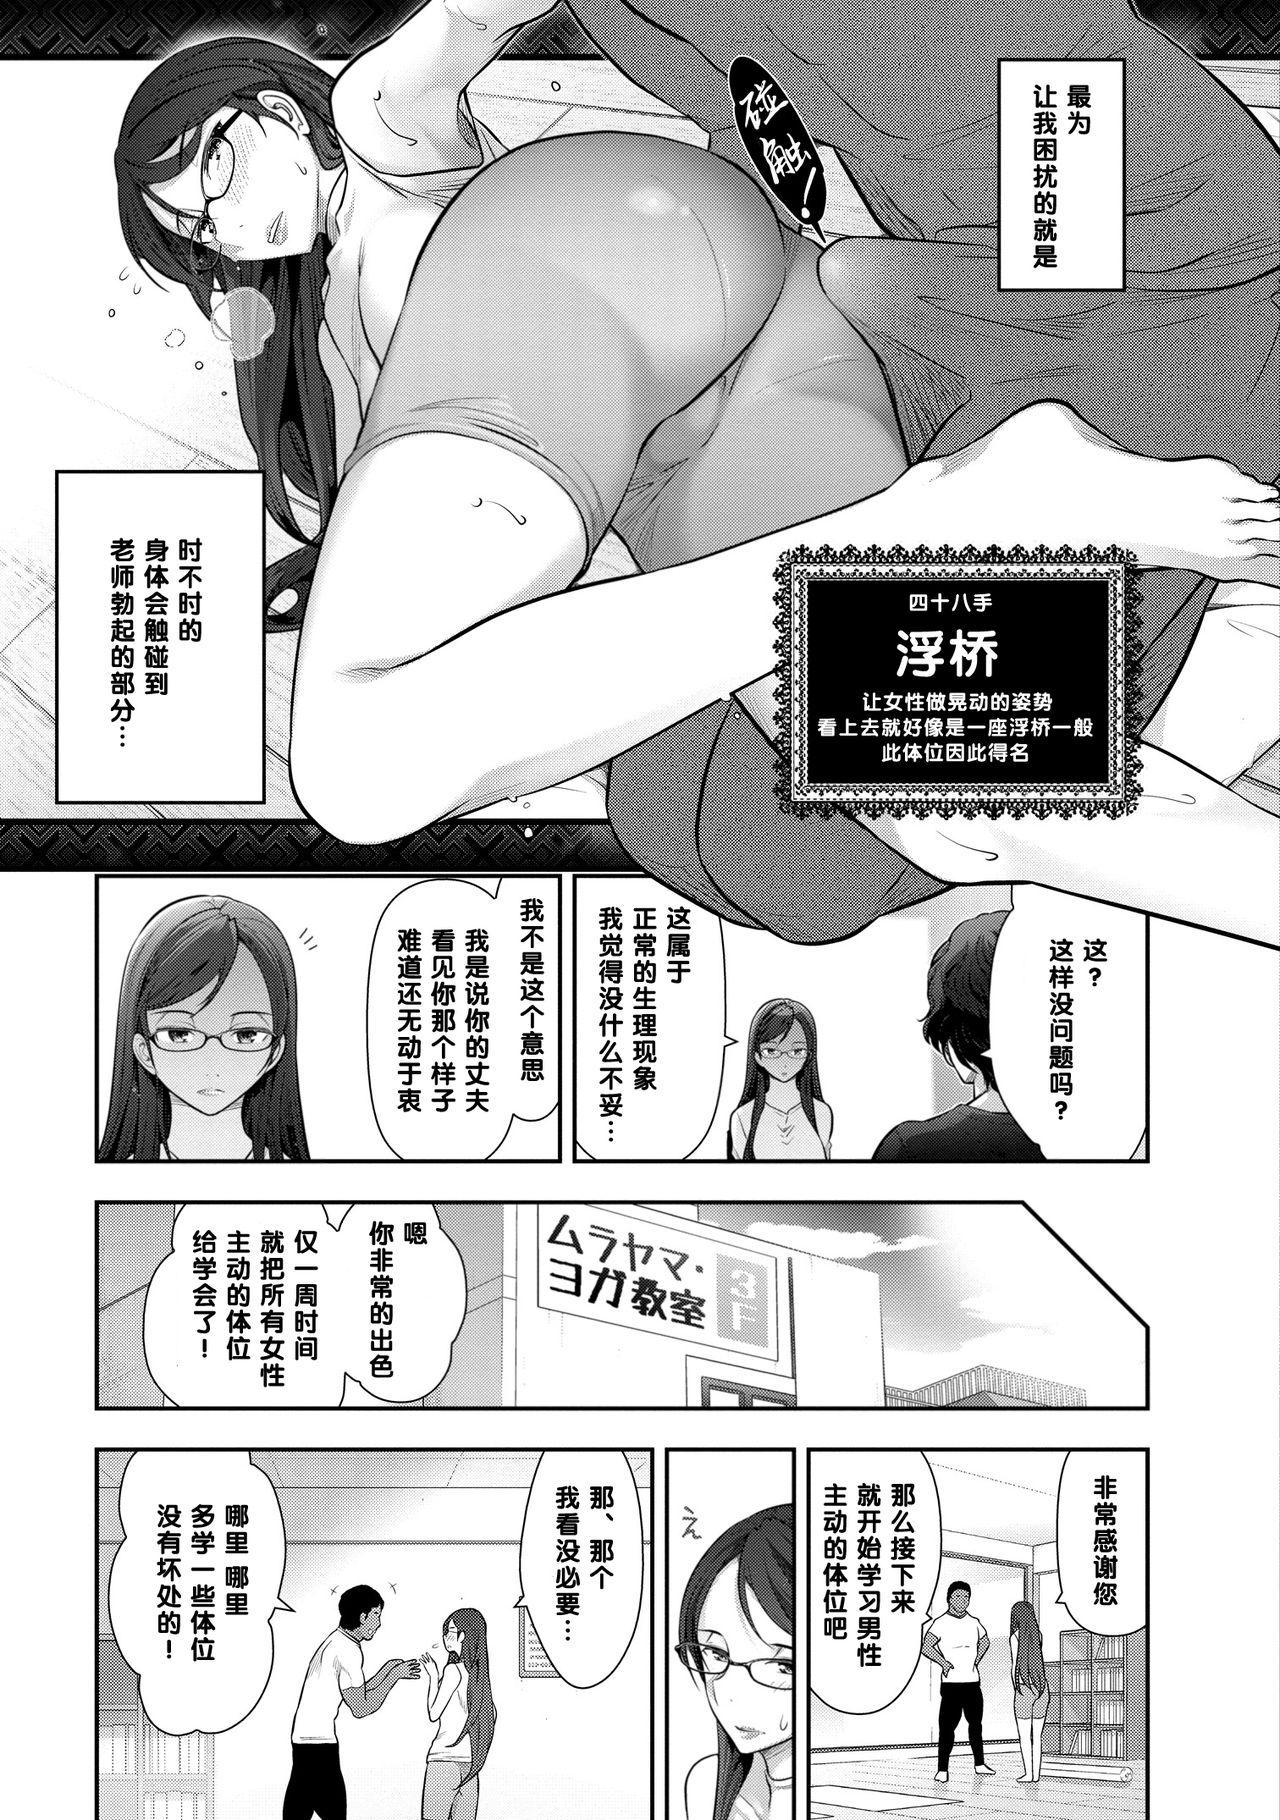 Lezdom 布川楓さん（30歳）の場合②（Chinese） Exhibitionist - Page 11